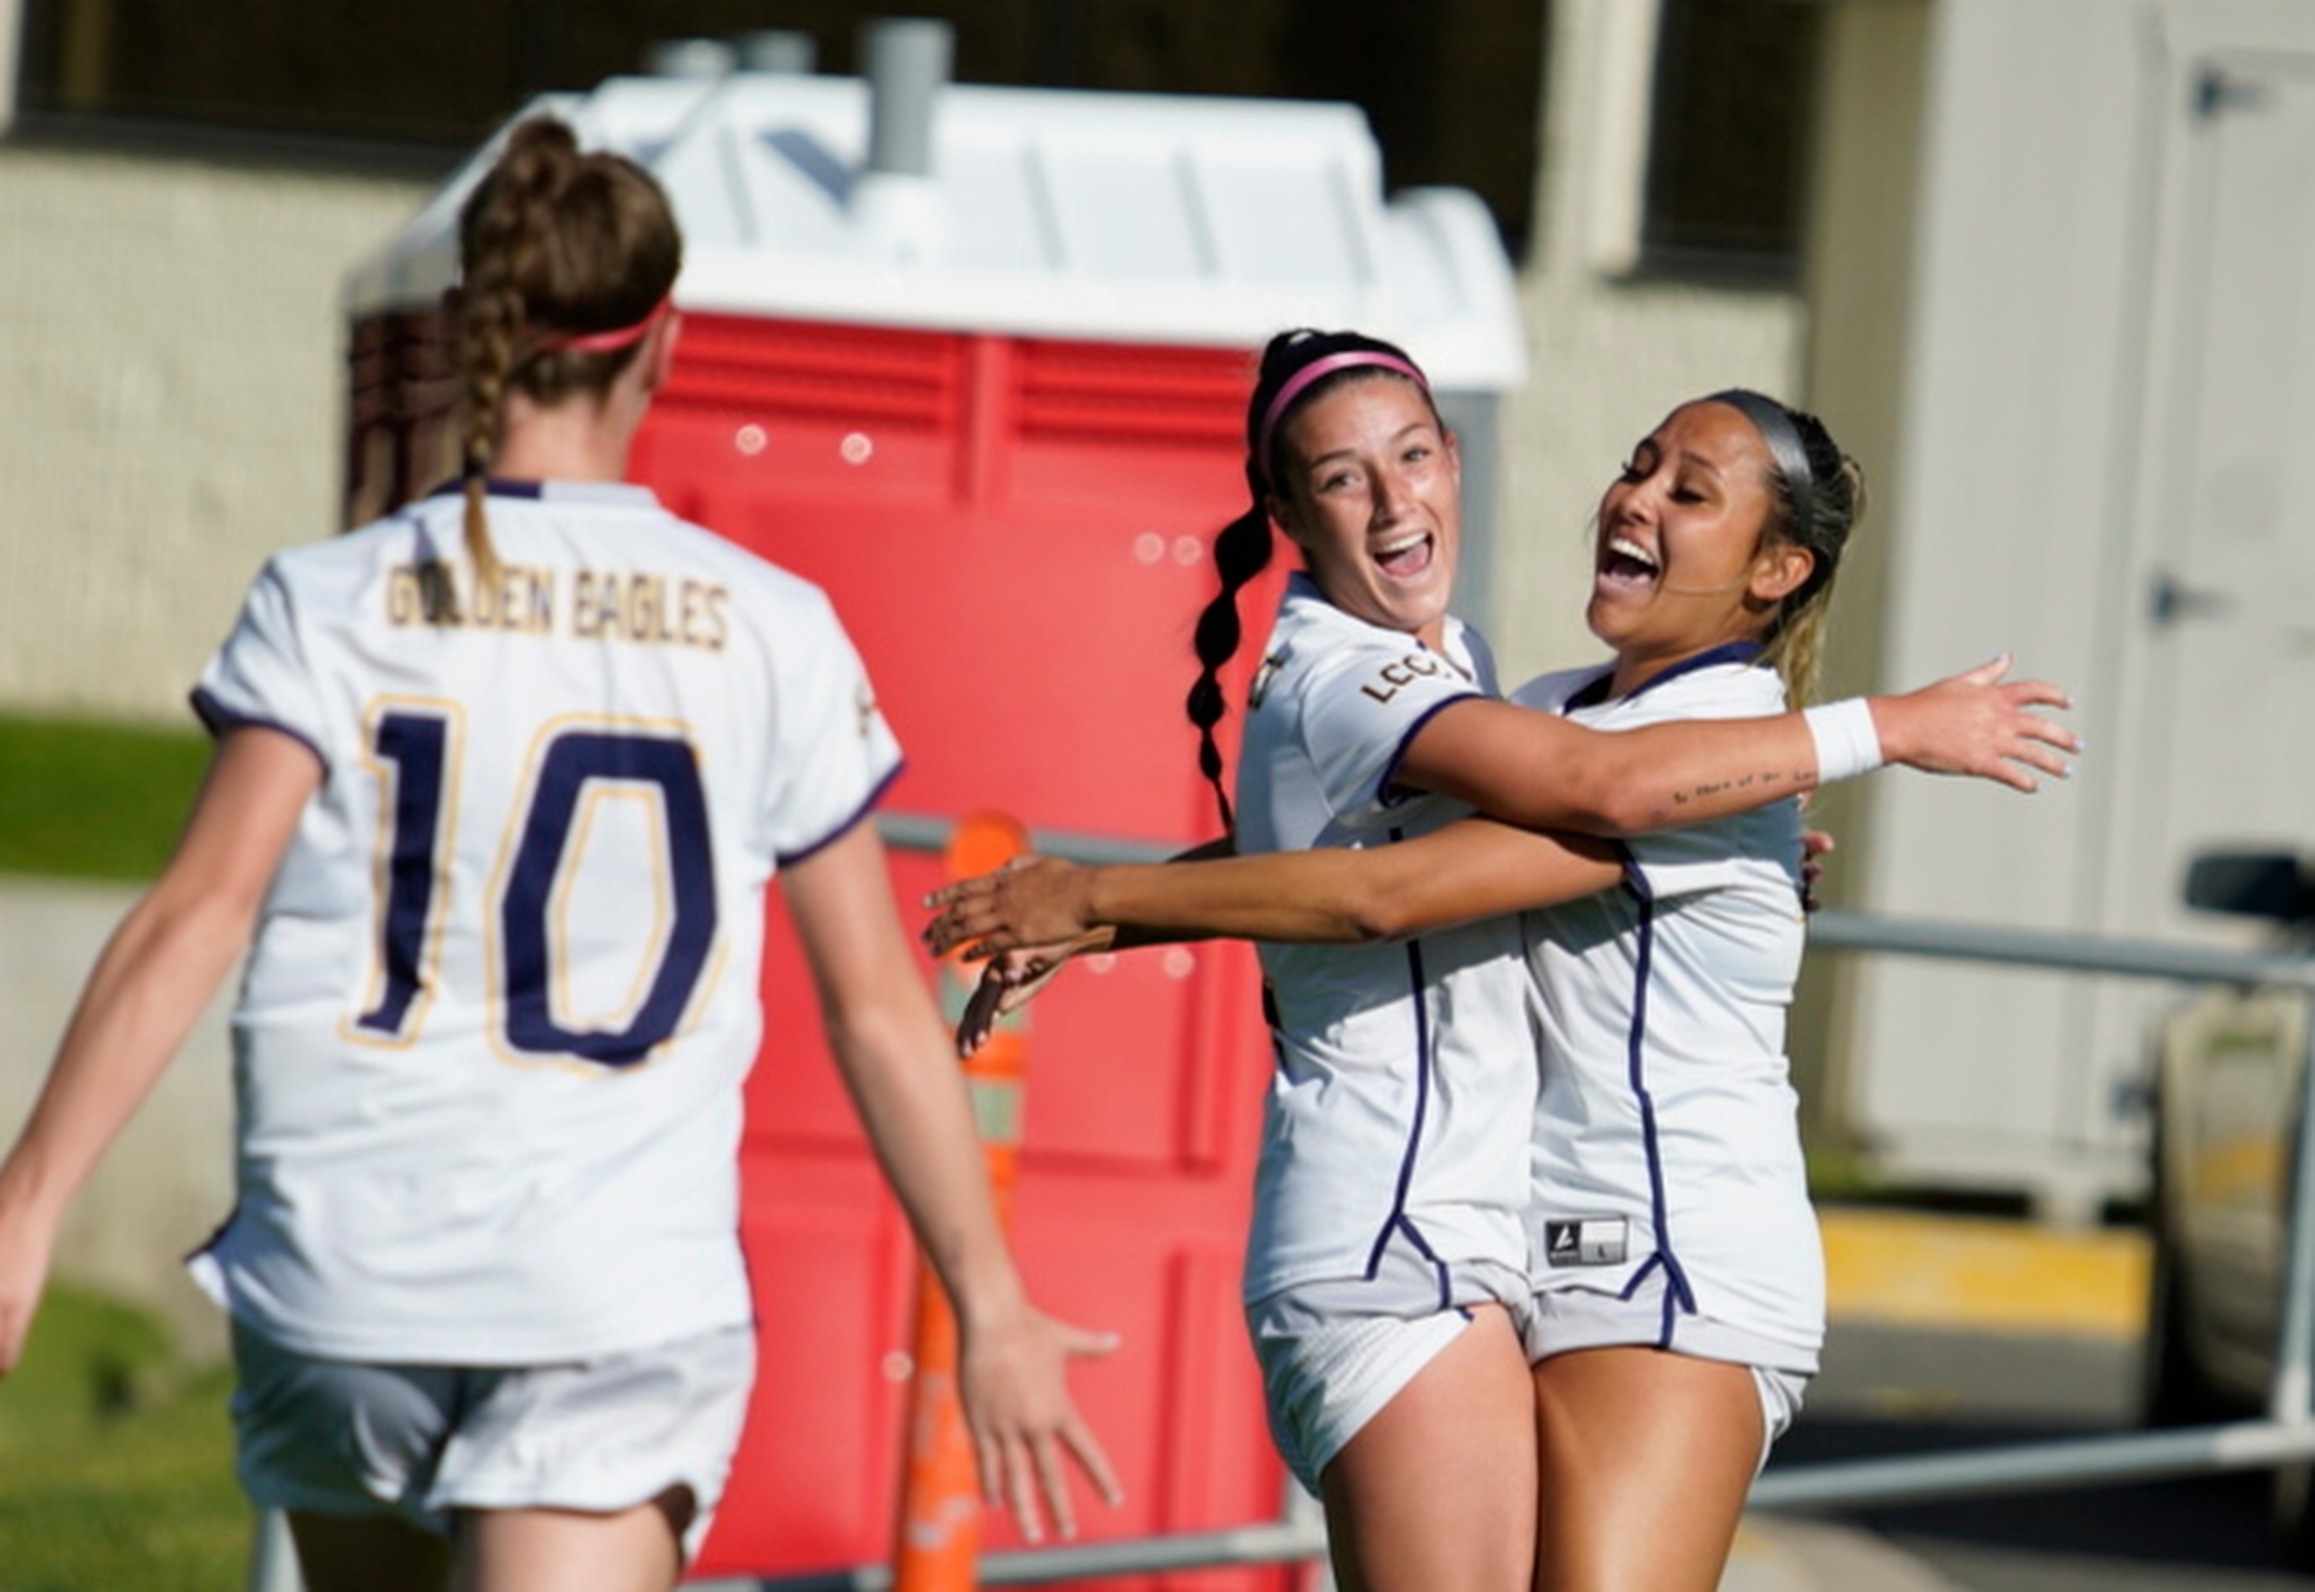 #19 LCCC advances to Region IX semifinals after 3-0 win over WNCC